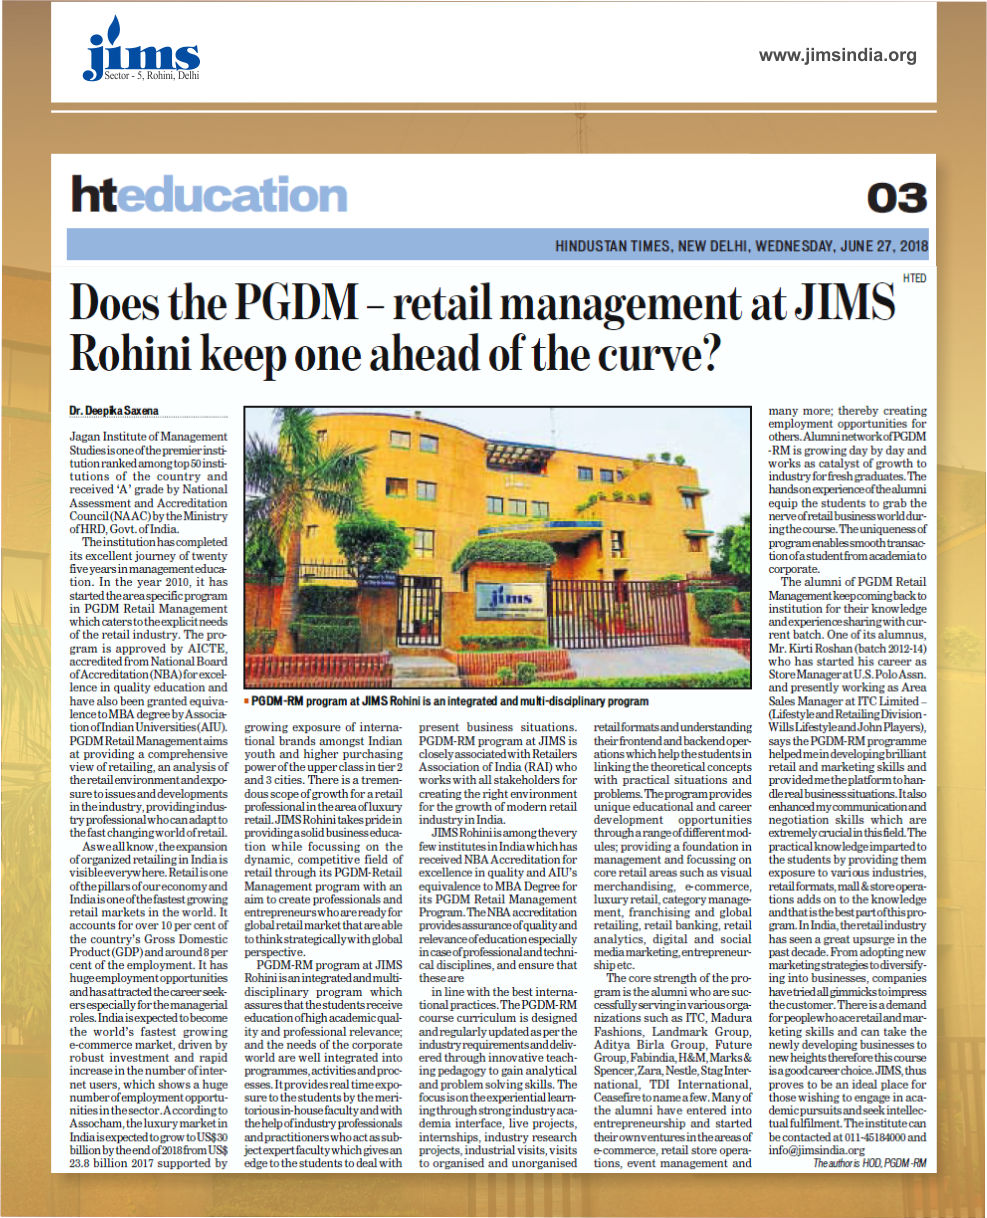 Article on Does the PGDM-Retail Management in JIMS Rohini Keep one ahead of the curve in Hindustan Times - Education